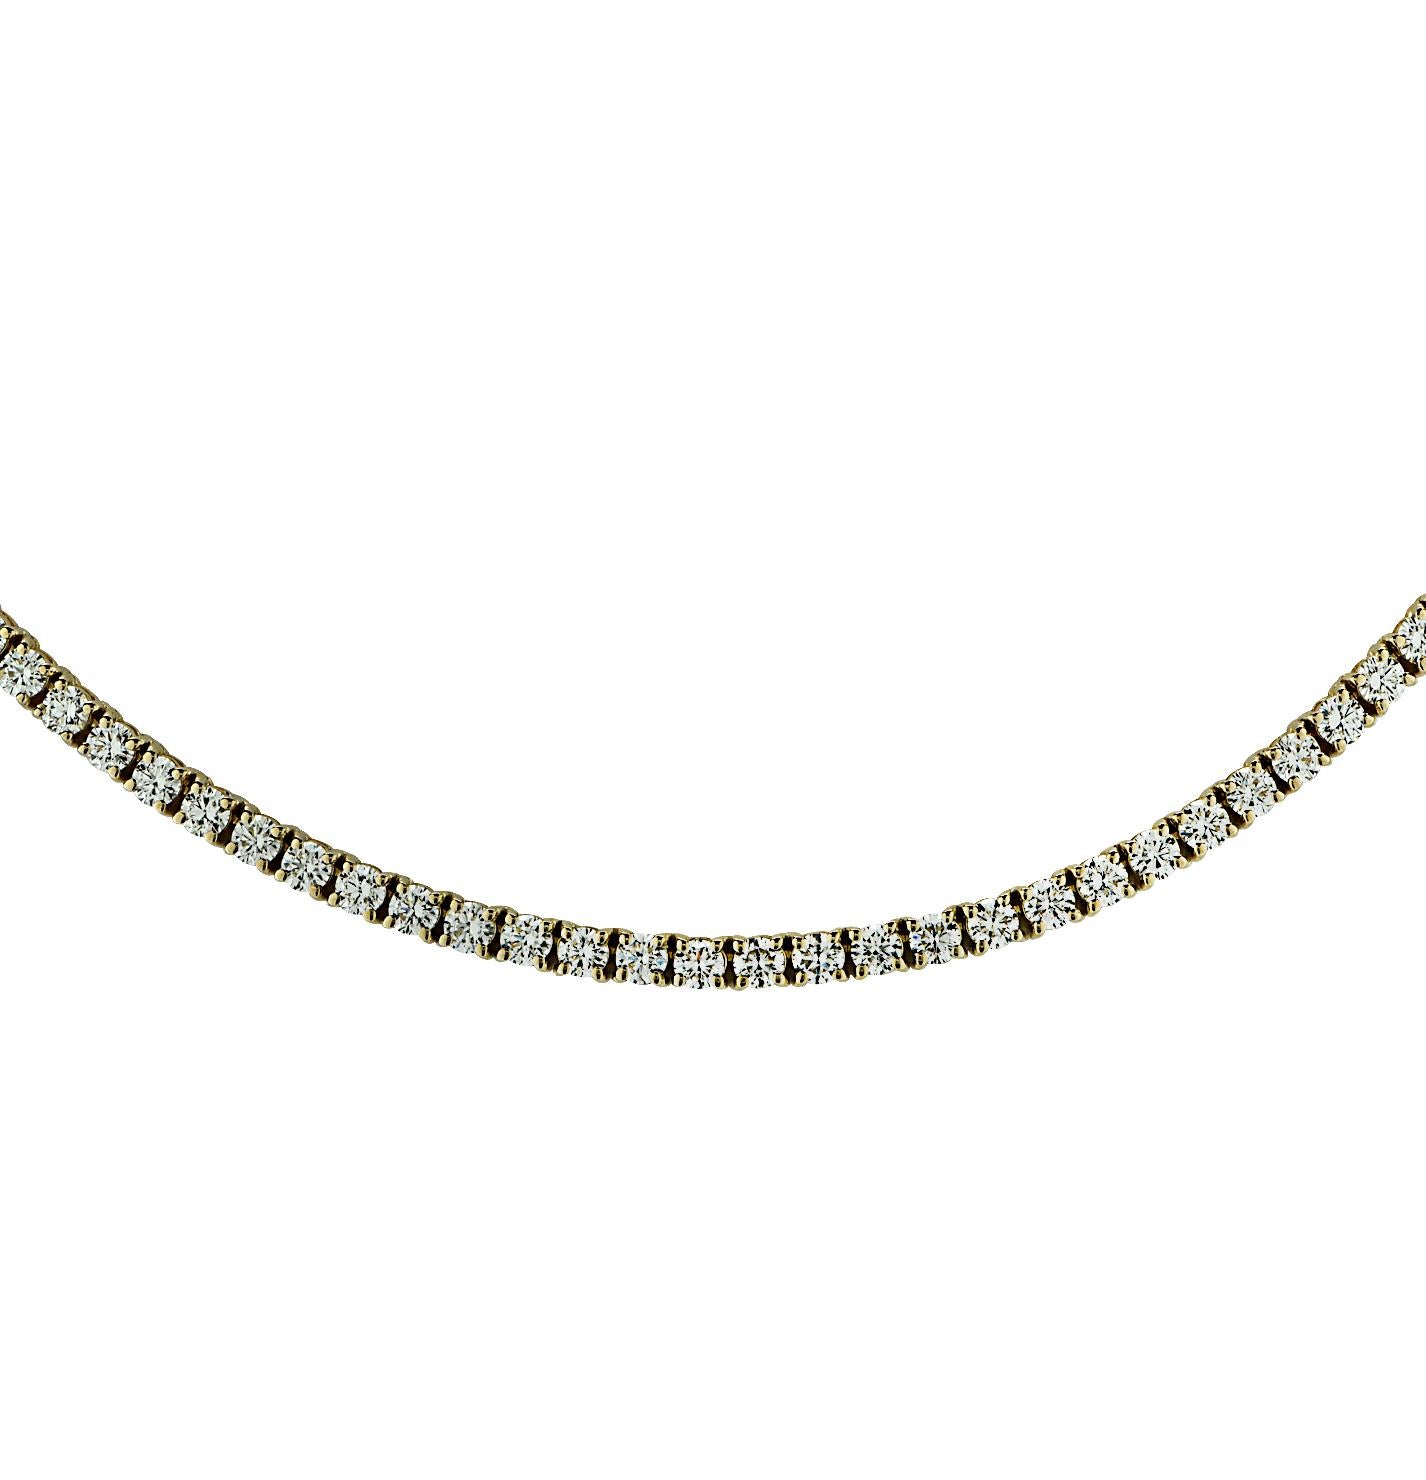 Exquisite Vivid Diamonds Straight Line diamond tennis necklace crafted in Yellow Gold, showcasing 130 round brilliant cut diamonds weighing 10.07 carats total, G color, VS Clarity. Each diamond was carefully selected, perfectly matched and set in a